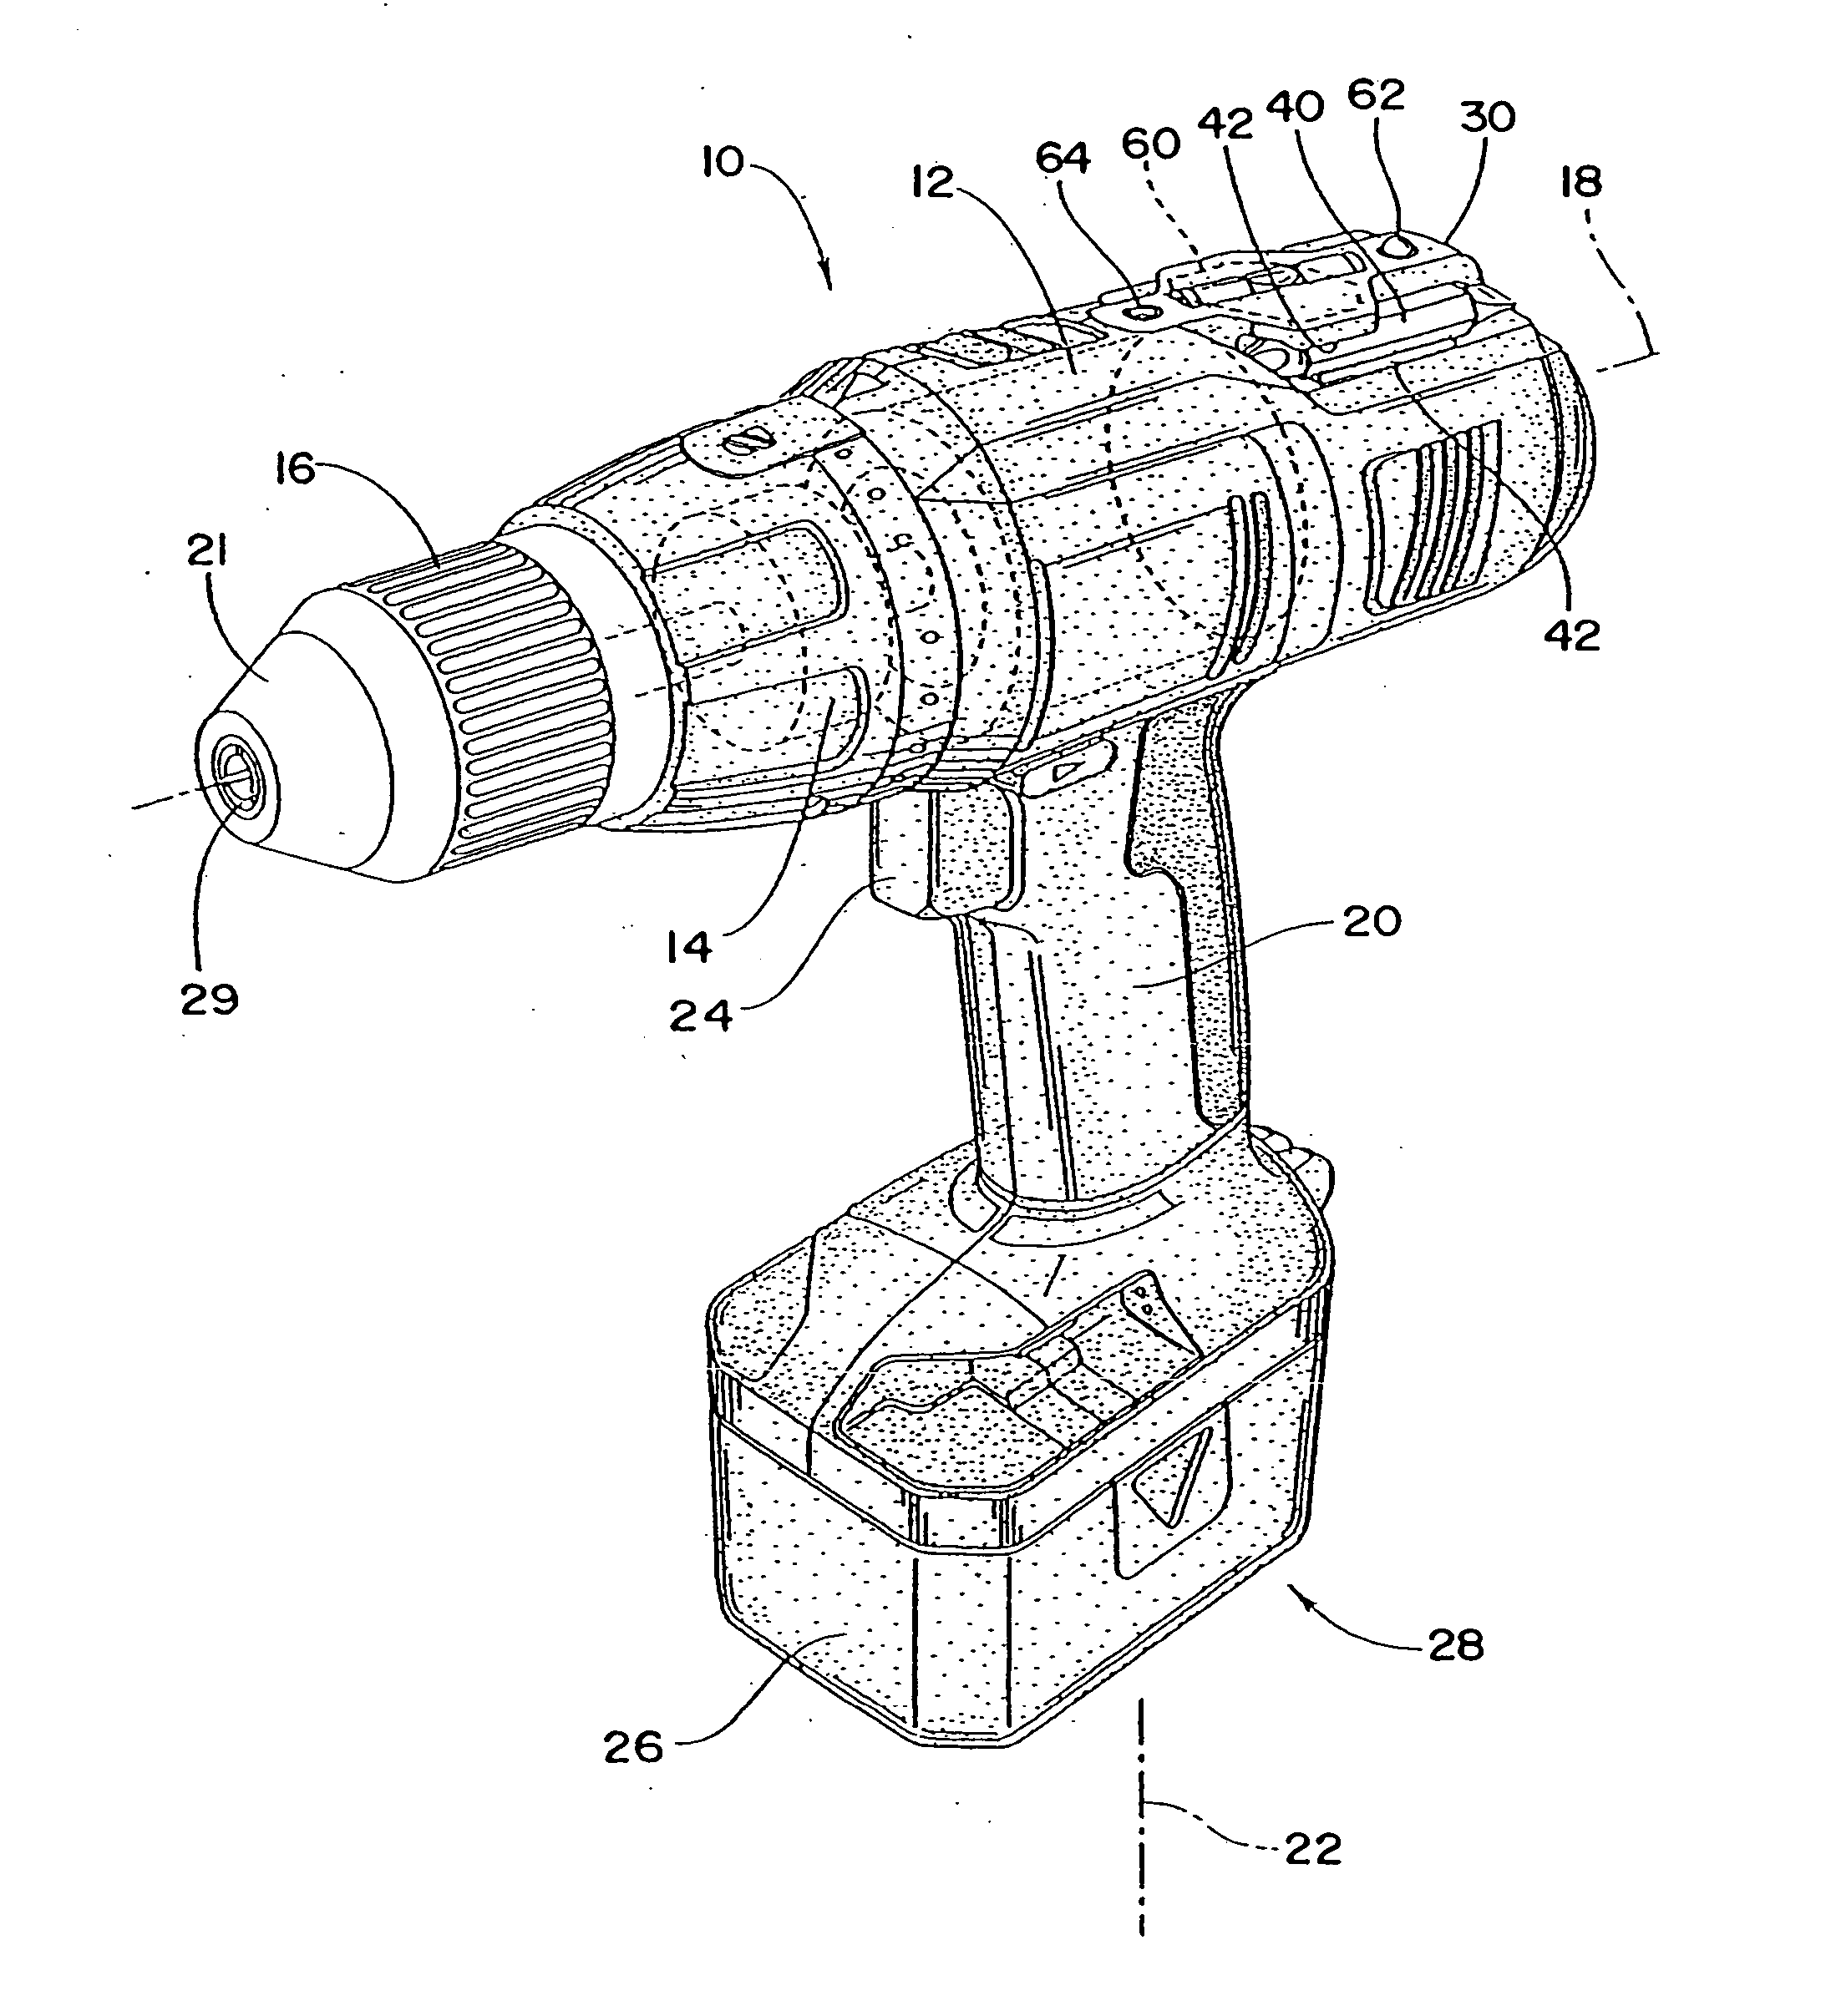 Hand-held tool with a removable object sensor